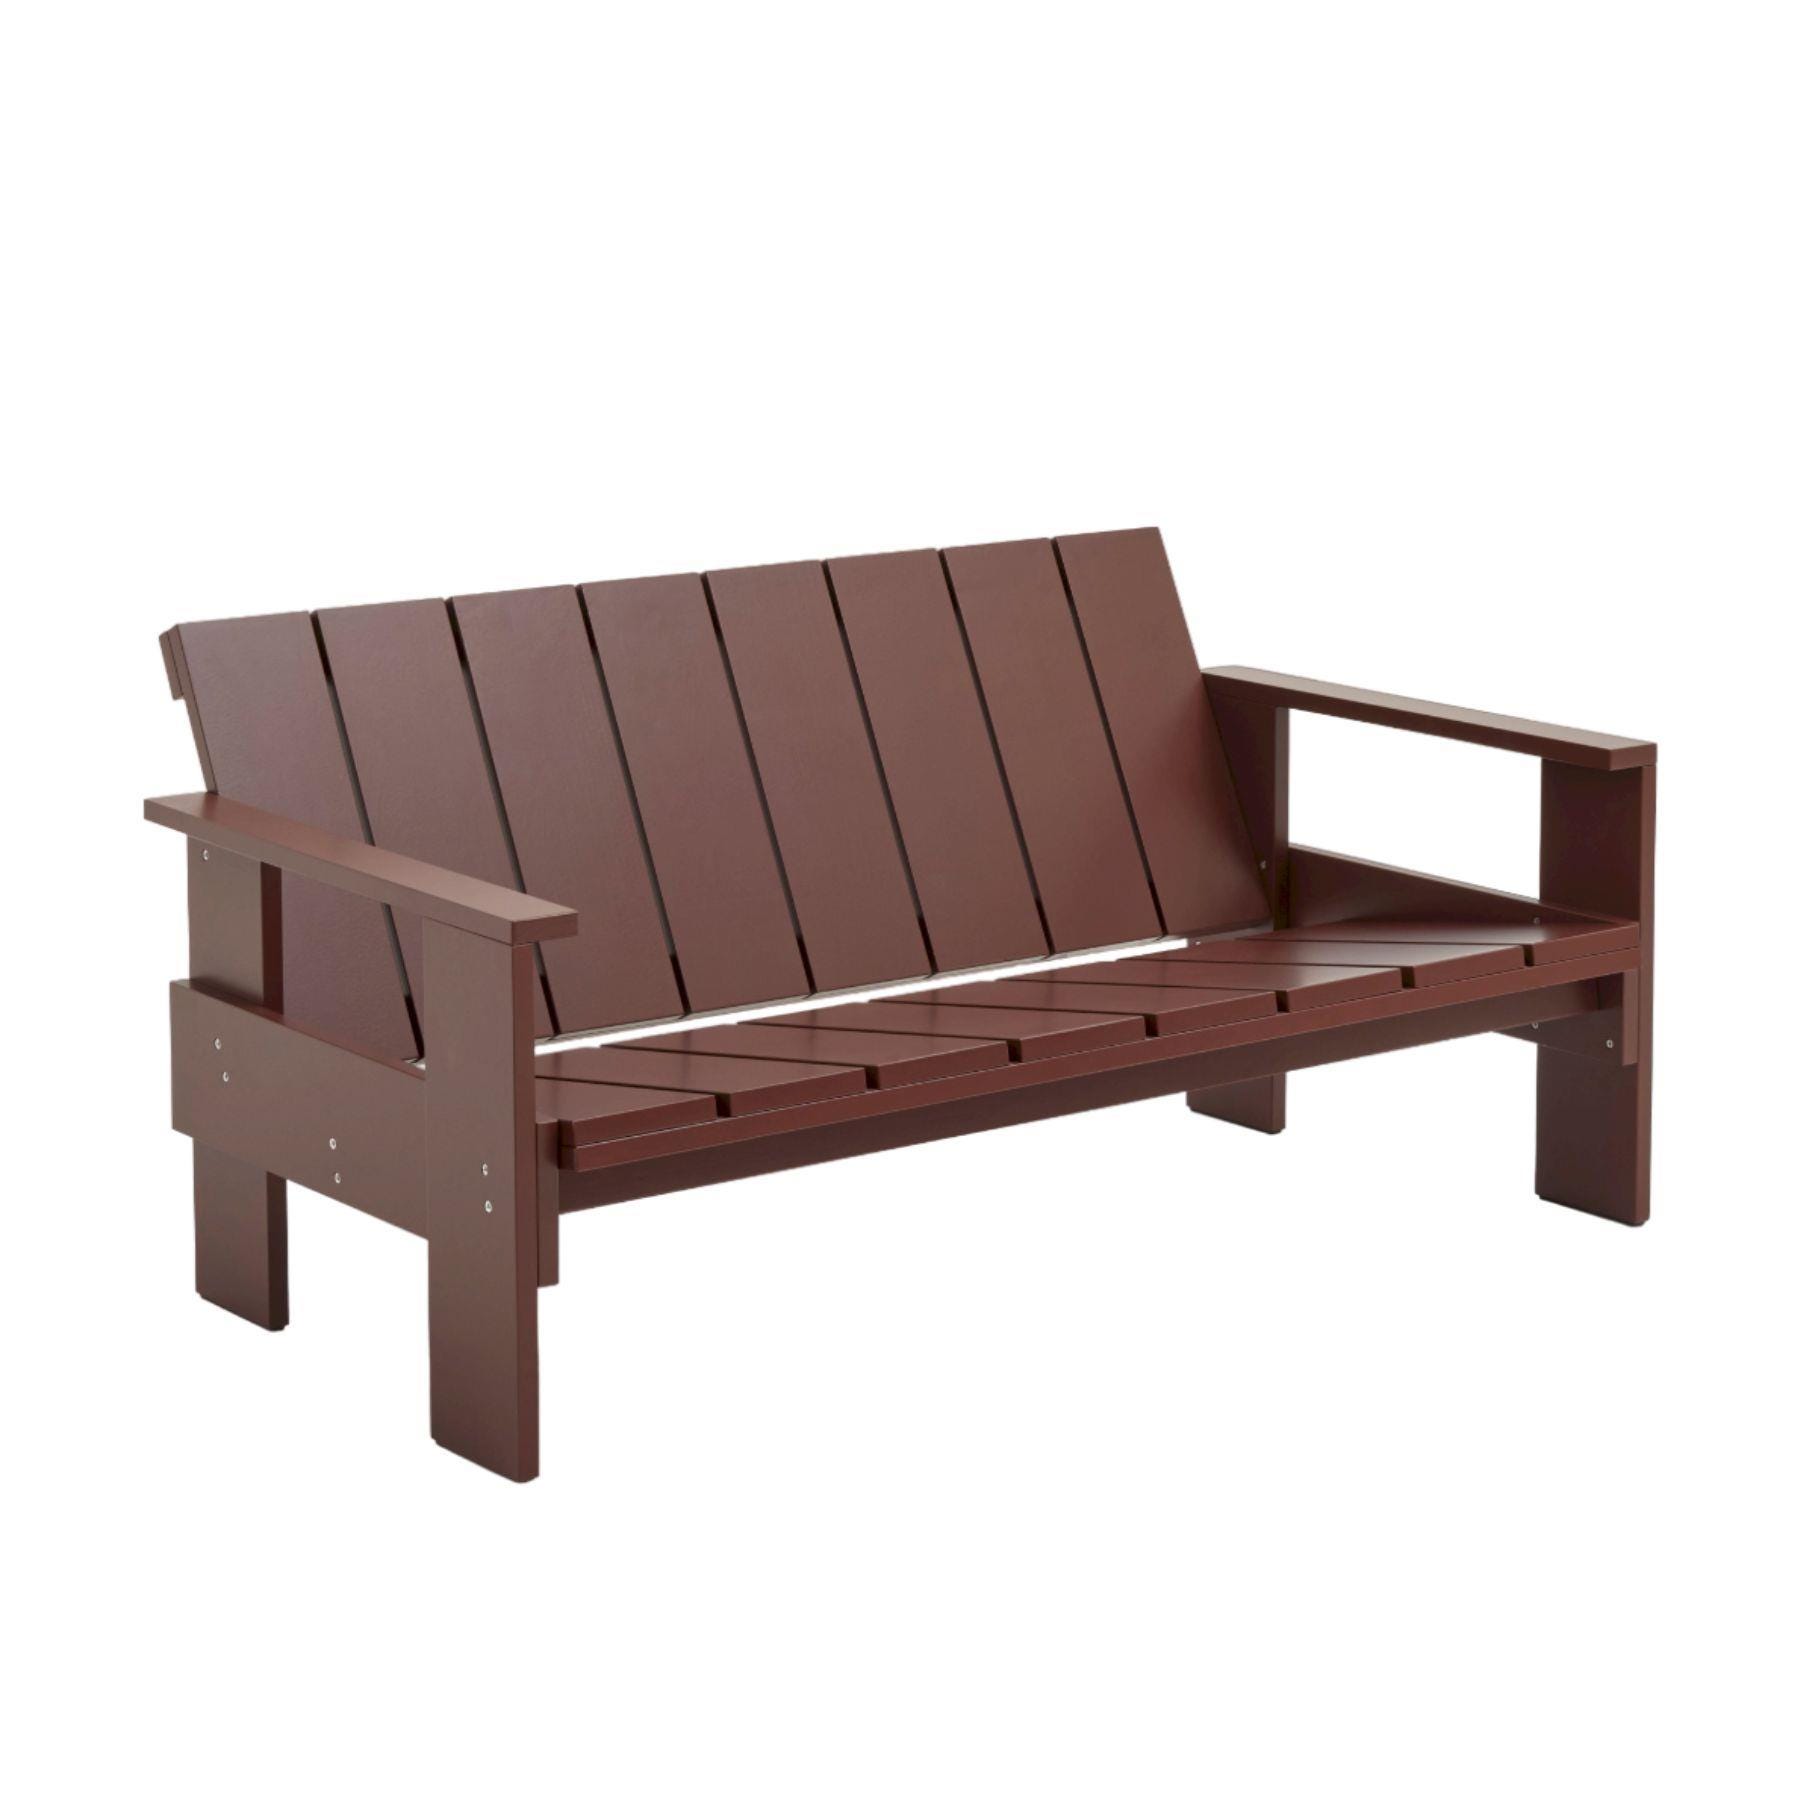 Hay Crate Lounge Sofa Iron Red Designer Furniture From Holloways Of Ludlow